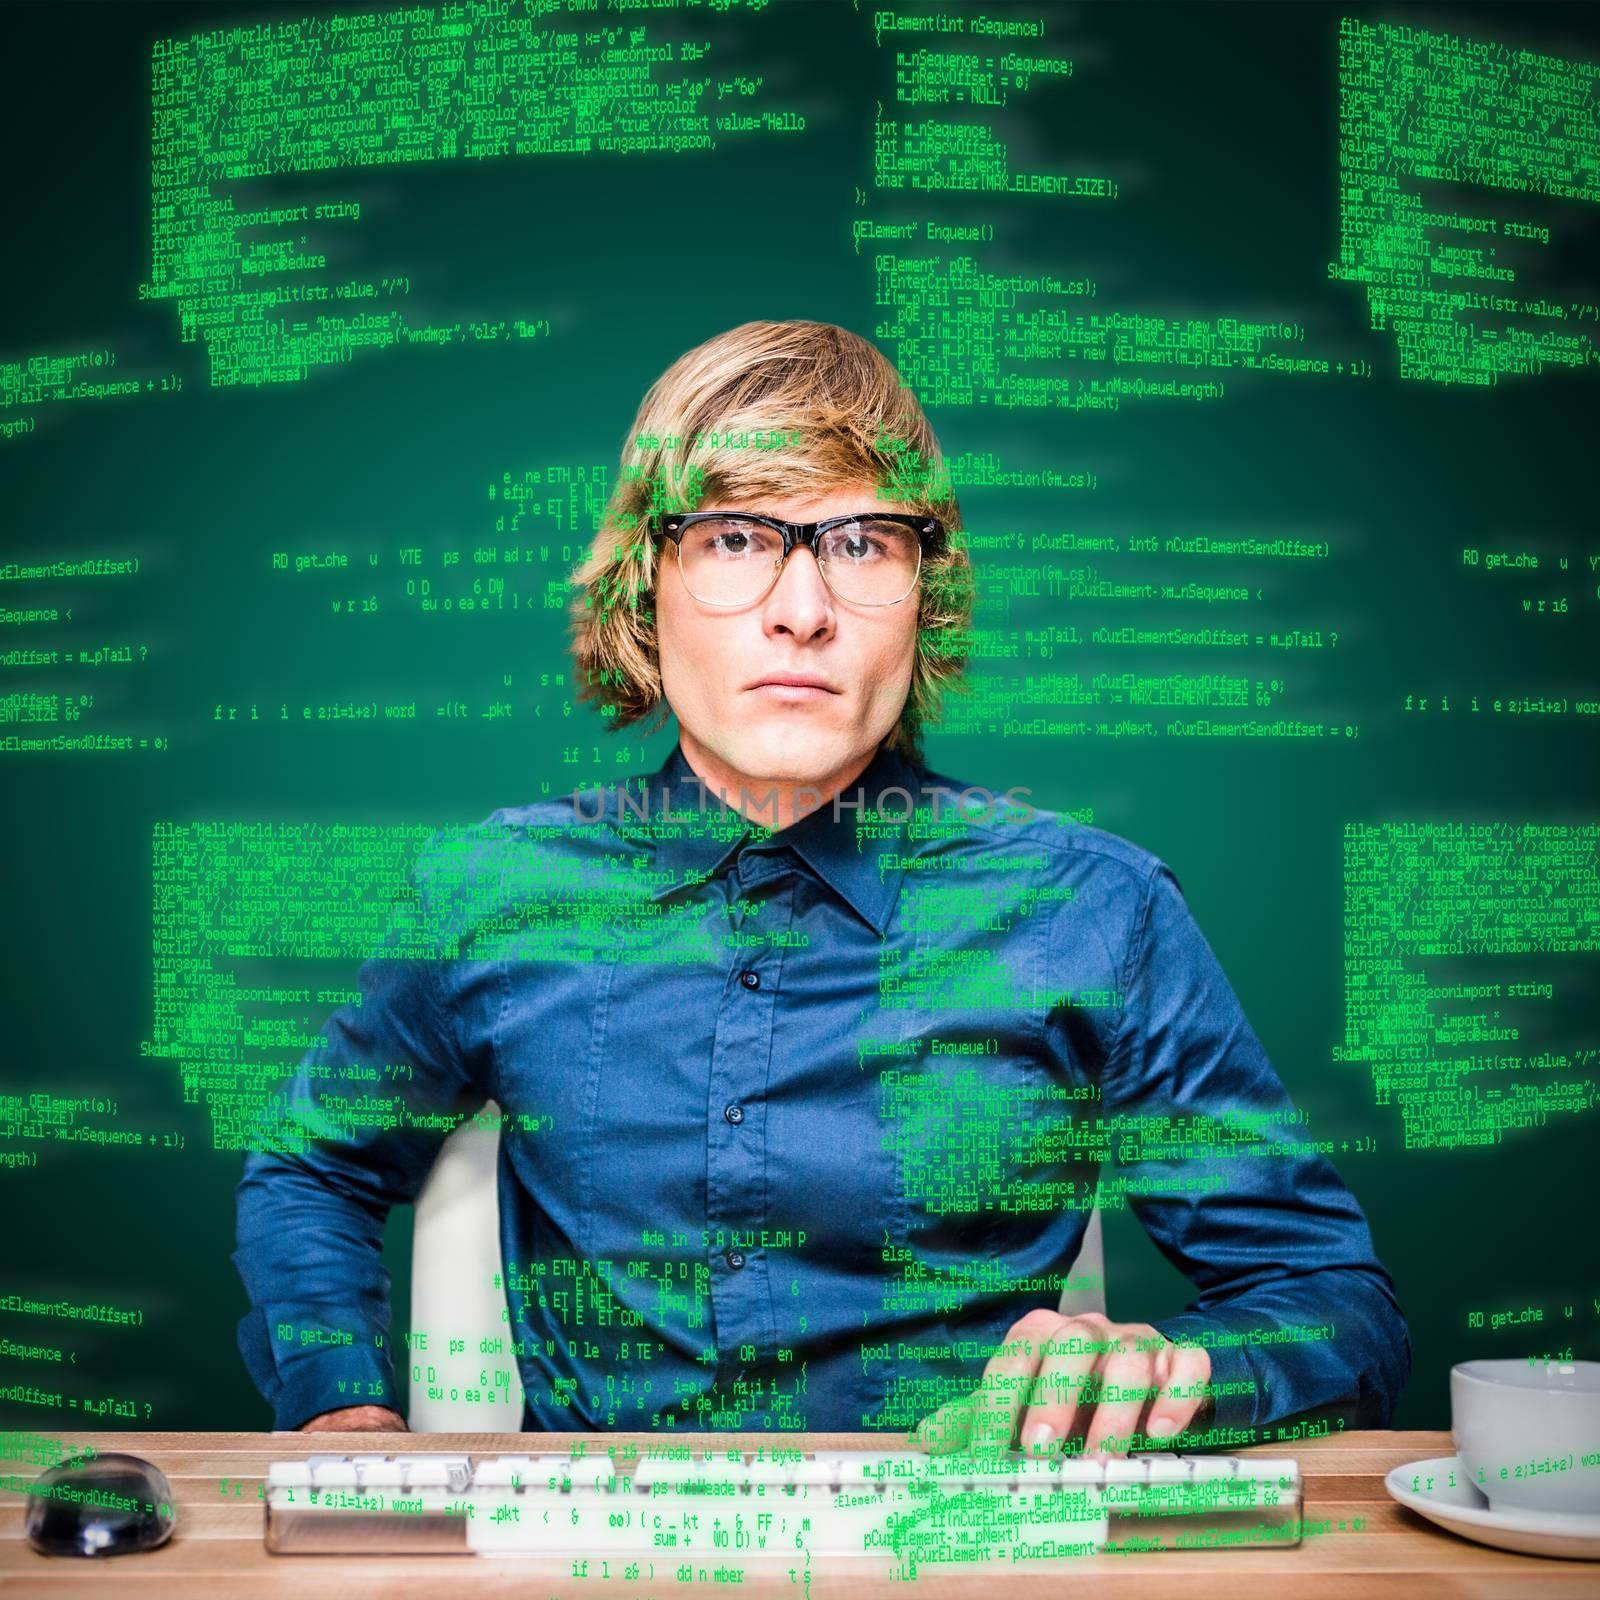 Focused hipster businessman using computer against green background with vignette